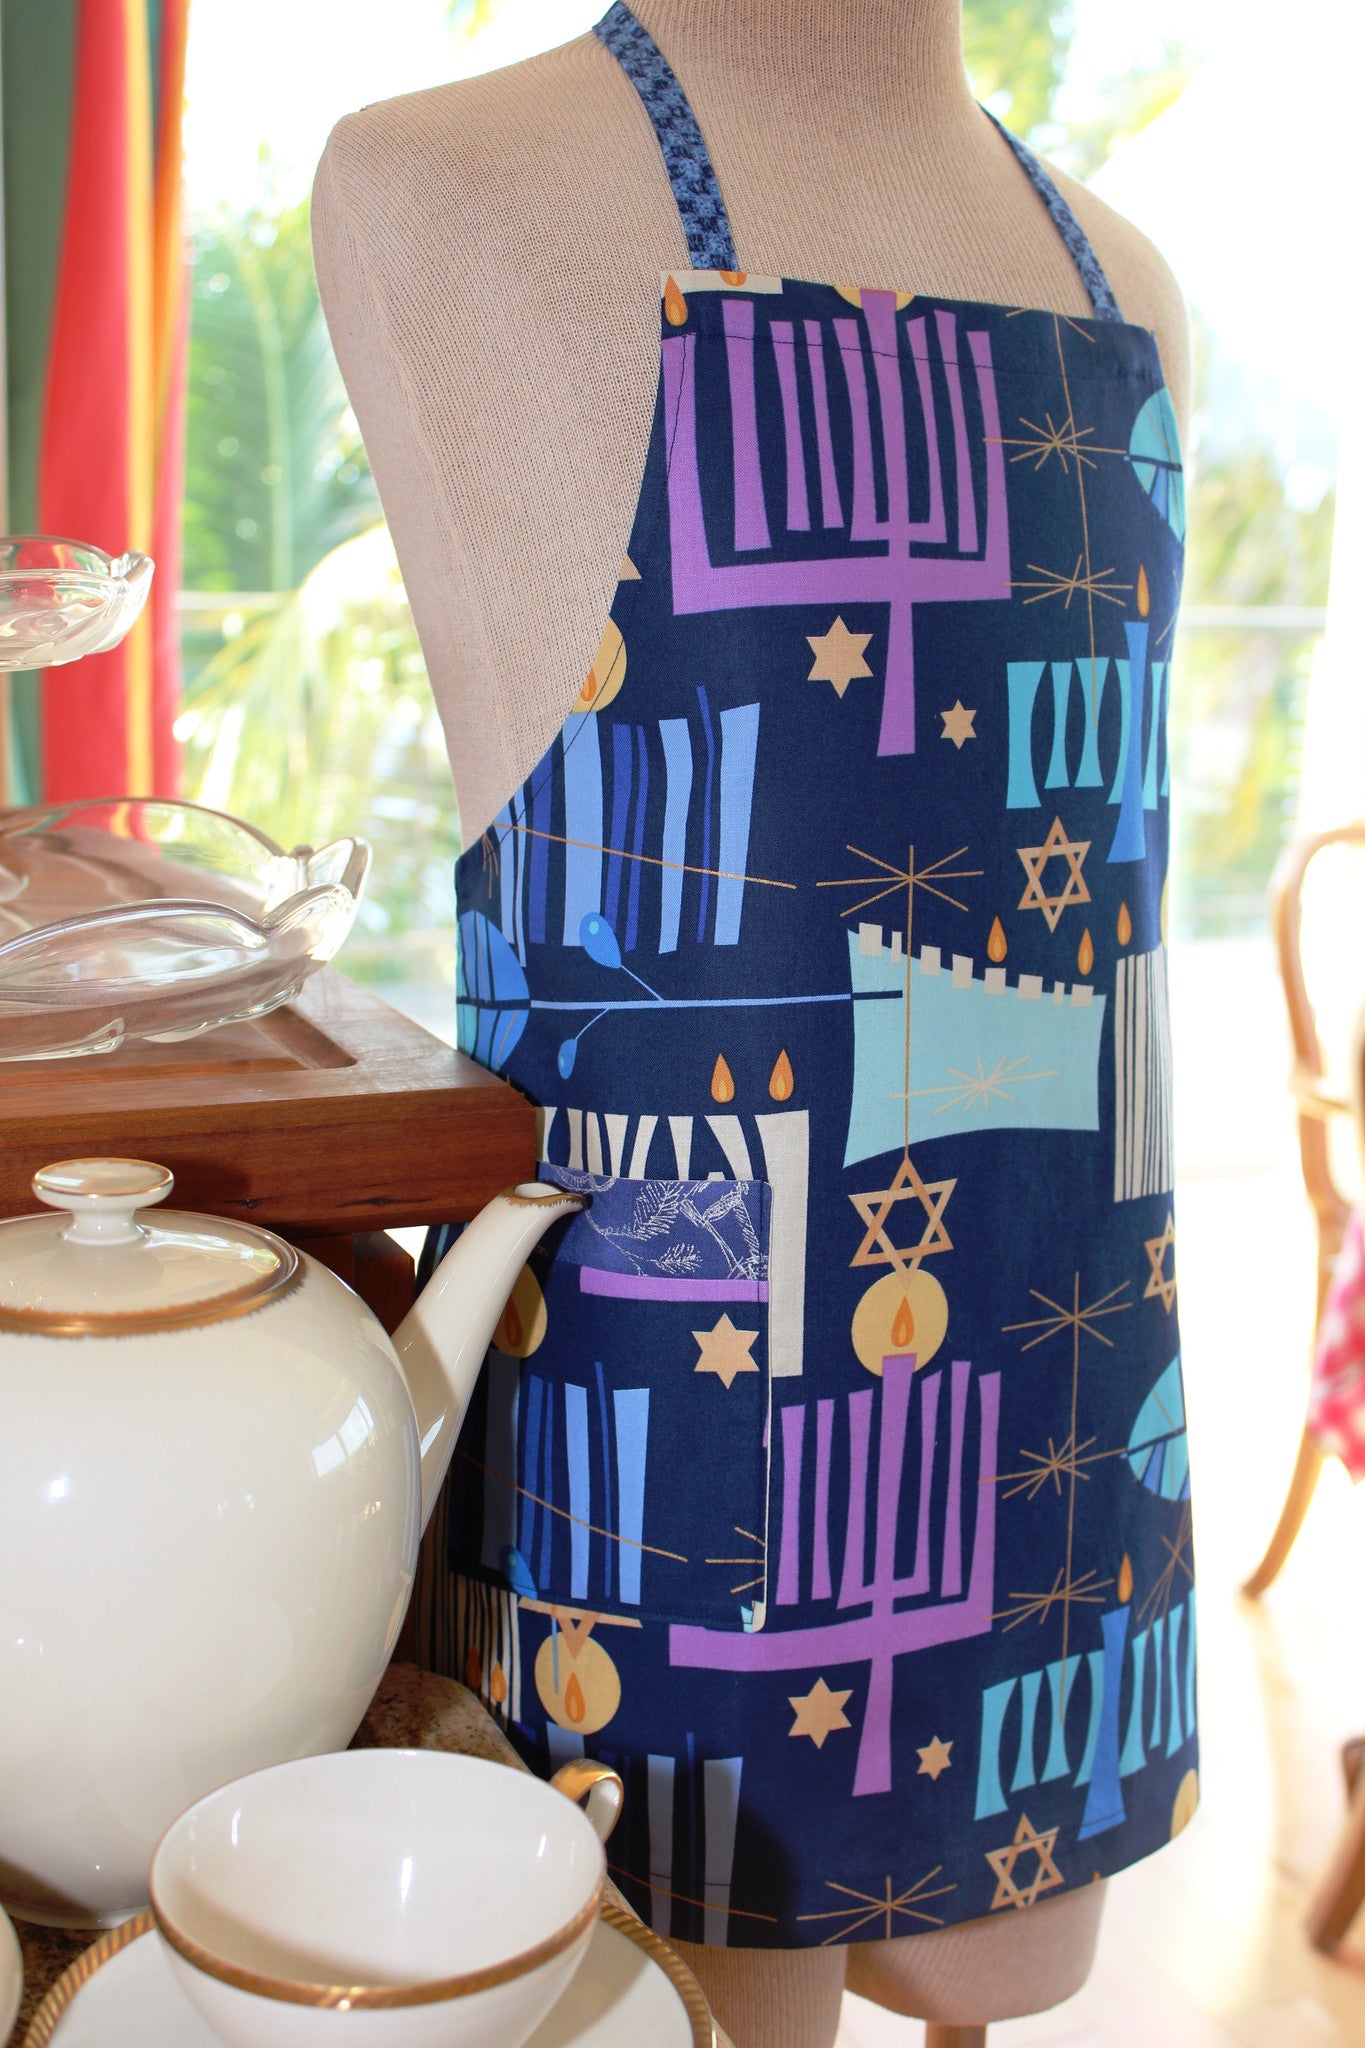 Hanukkah Kid's Apron-The Blue Peony-Age Group_Kids,Category_Apron,Color_Blue,Department_Kitchen,Gender_Boys,Gender_Girls,Material_Cotton,Size_Medium (ages 6-11),Size_Small (ages up to 5),Theme_Hanukkah